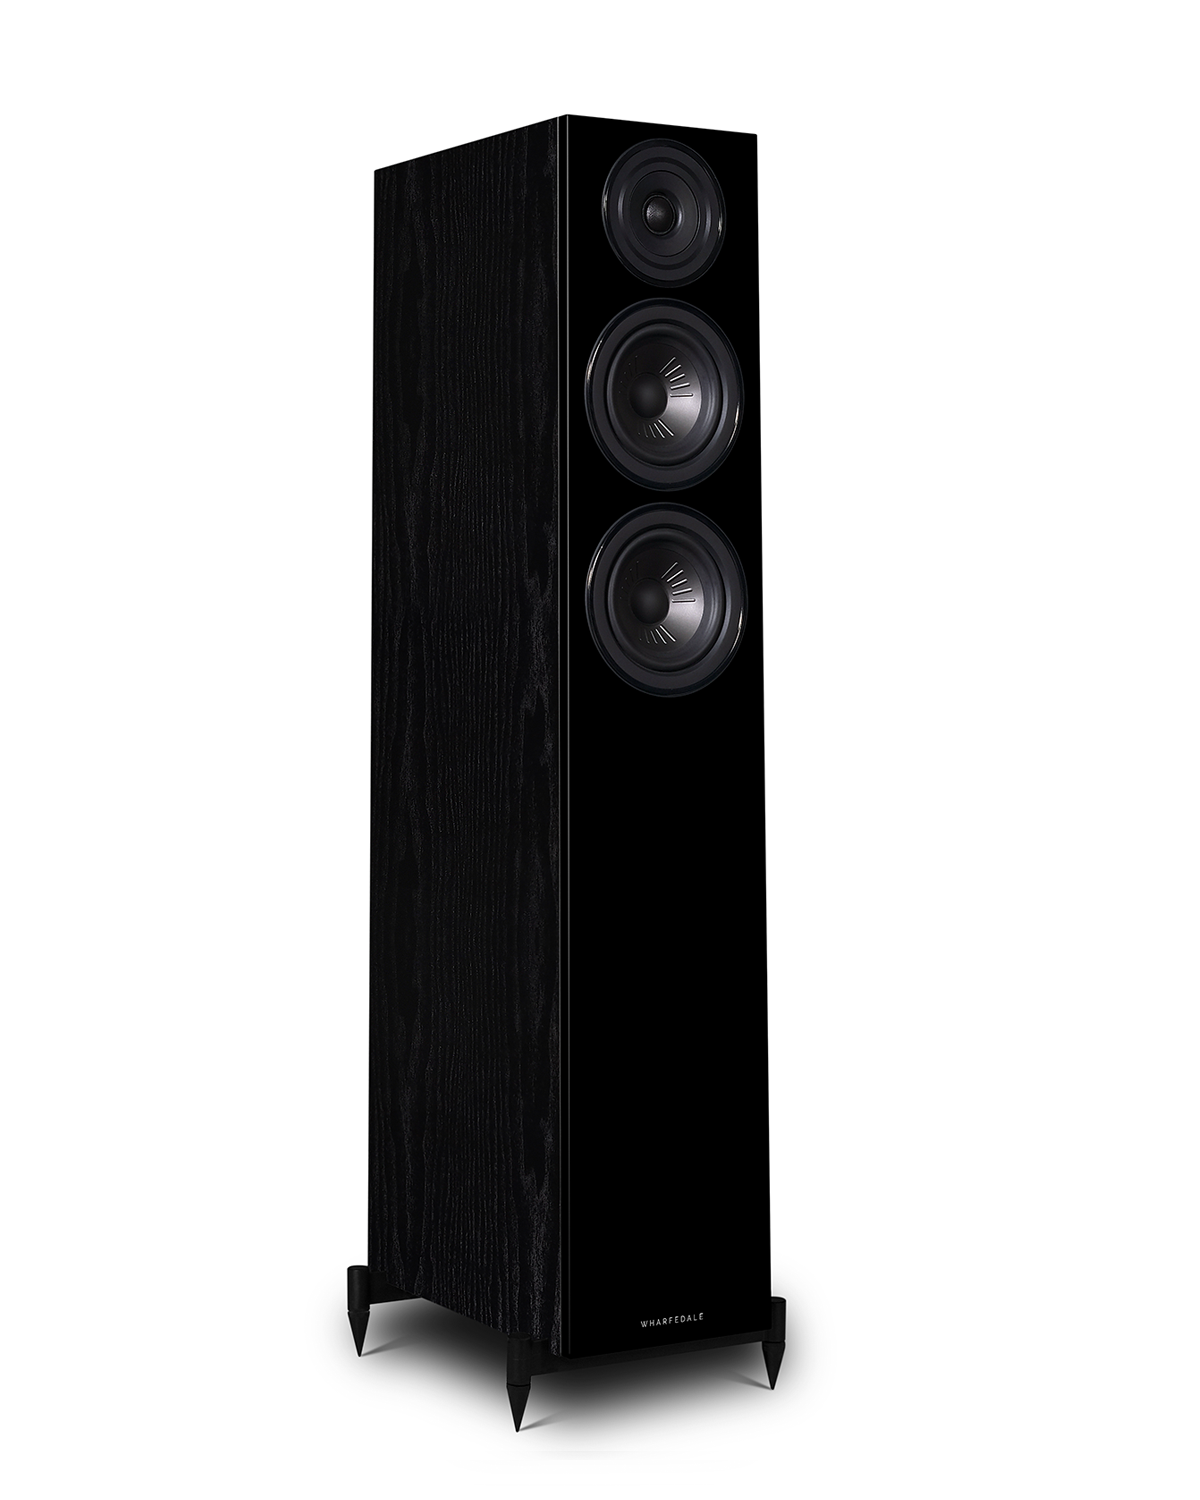 The powerhouse model of the Wharfedale DIAMOND 12 series, the DIAMOND 12.4 is the room-filling, chest-pounding, largest model in the series. For larger, more powerful systems and cinema-style home theatre experiences, the DIAMOND 12.4 will fill your room with an impactful, immersive performance.